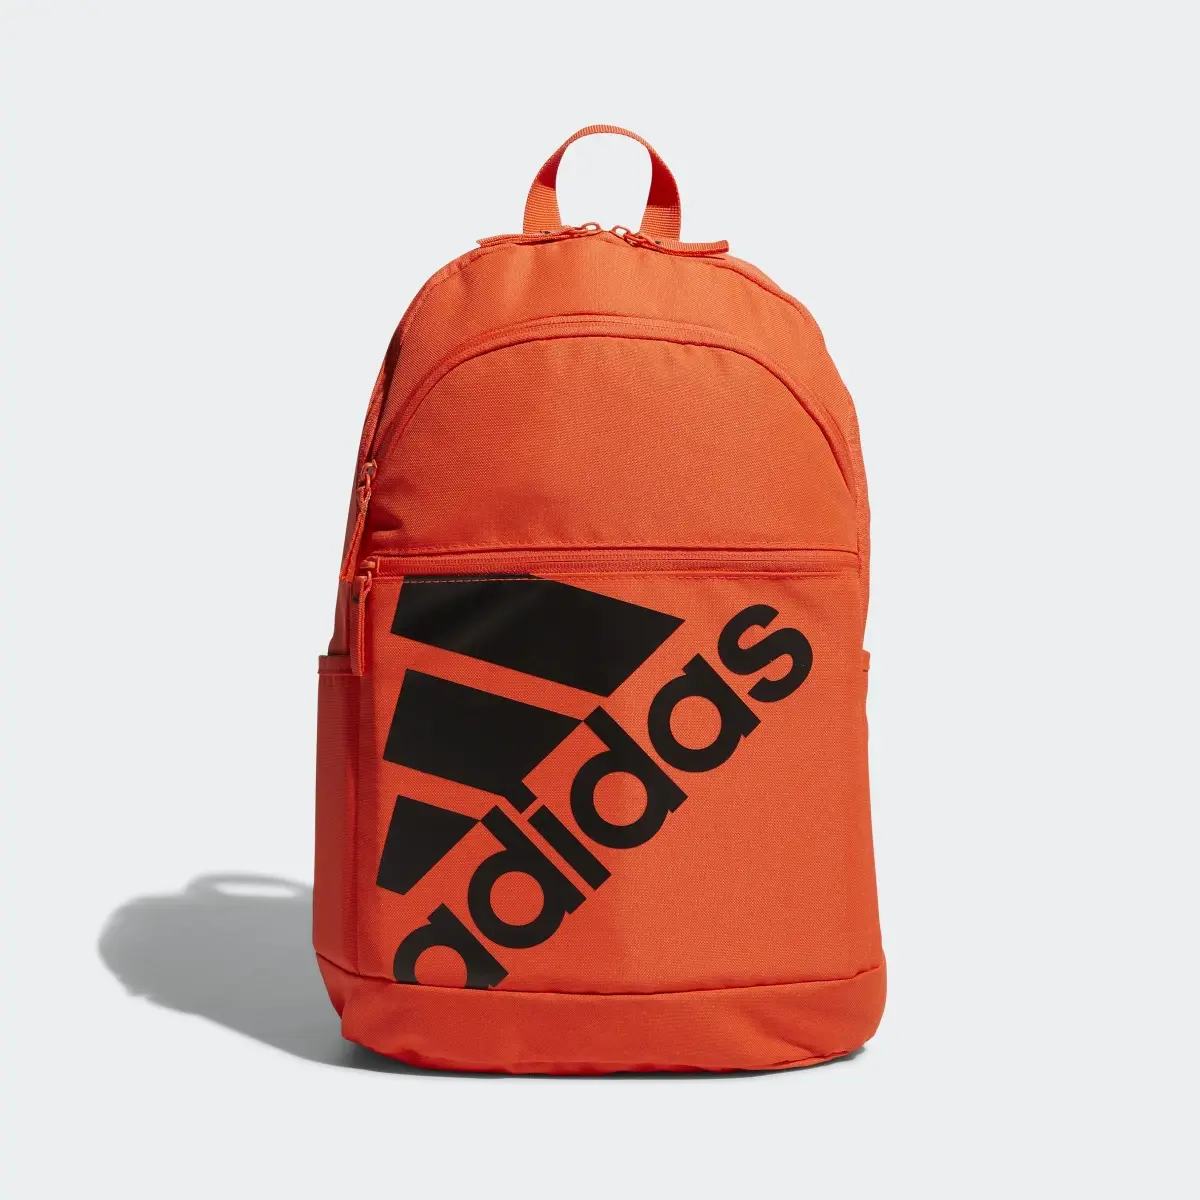 Adidas CL Classic Backpack. 2